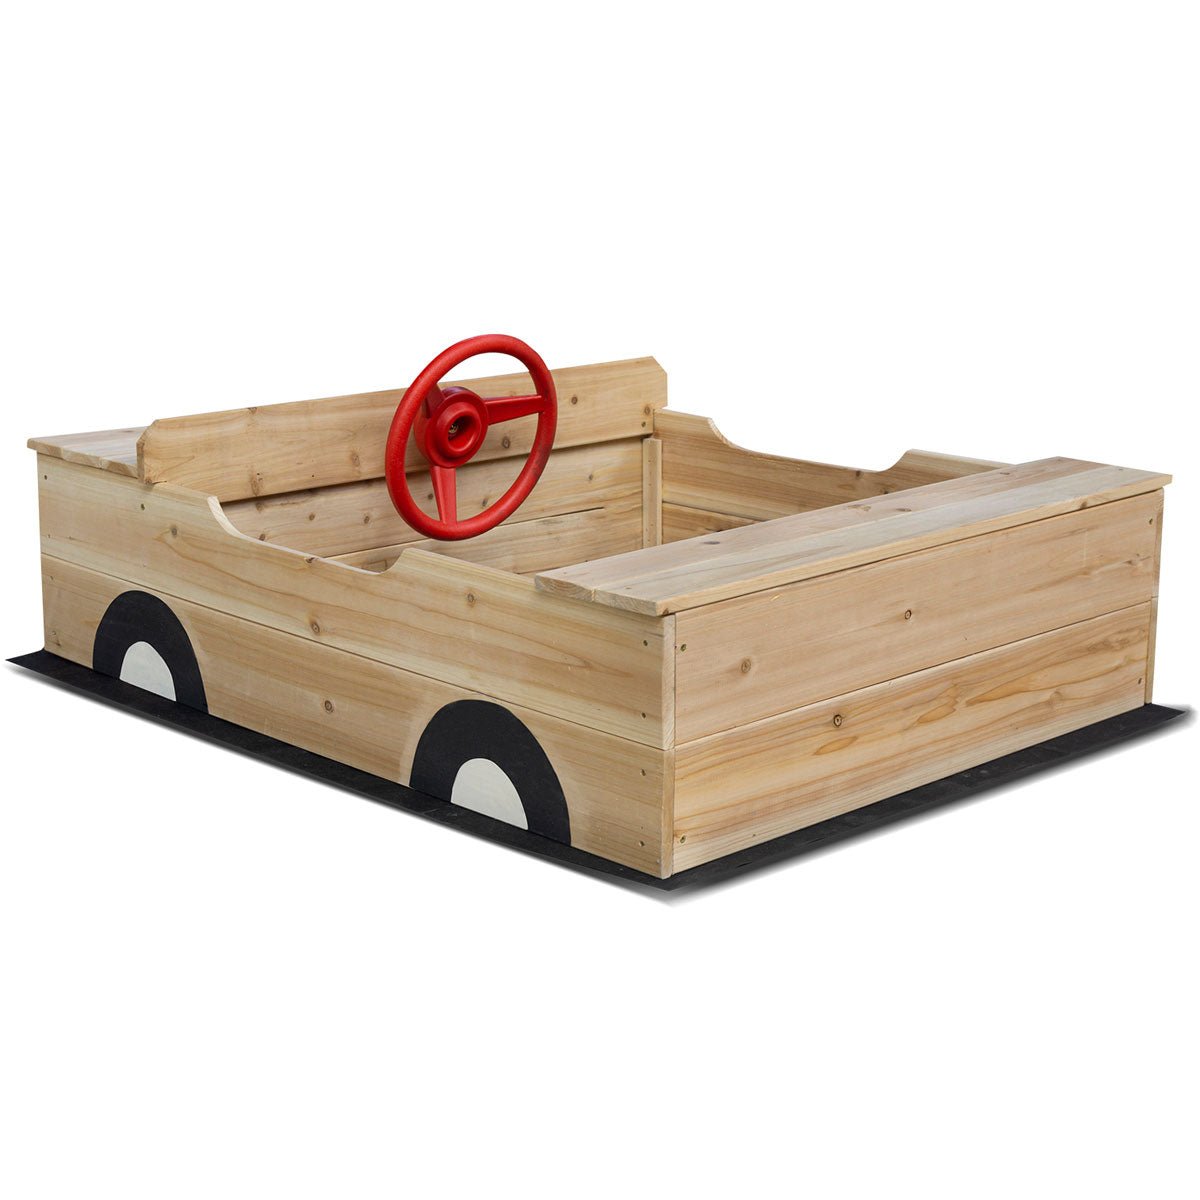 Shop Lifespan Kids Outback Sandpit | Active Learning and Play